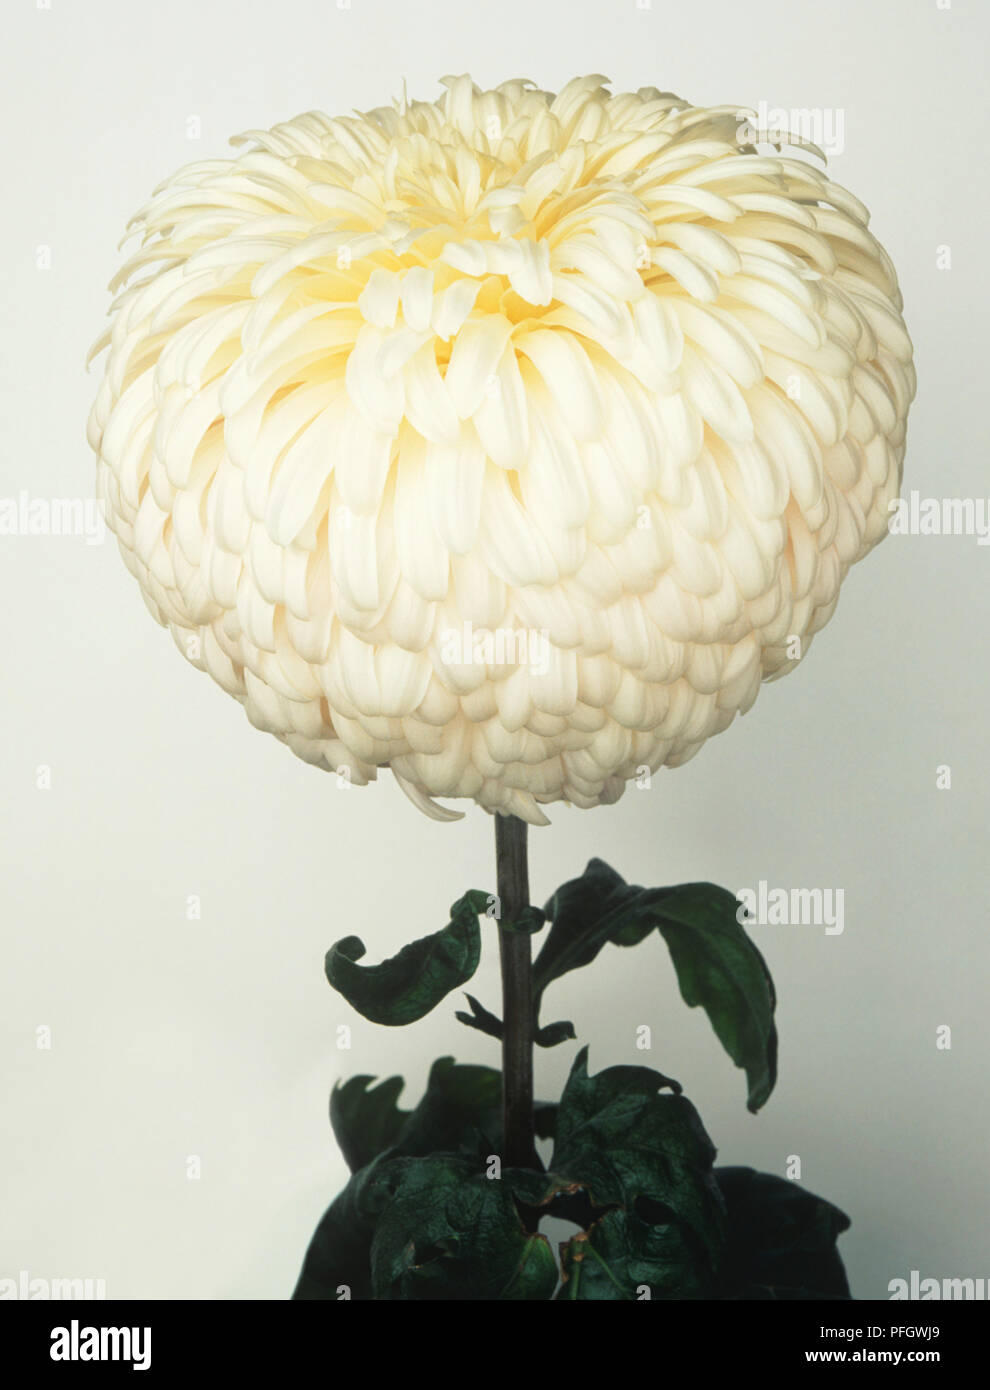 Chrysanthemum 'John Wingfield', large, white flower head with reflexed petals, on tall stem with green leaves Stock Photo